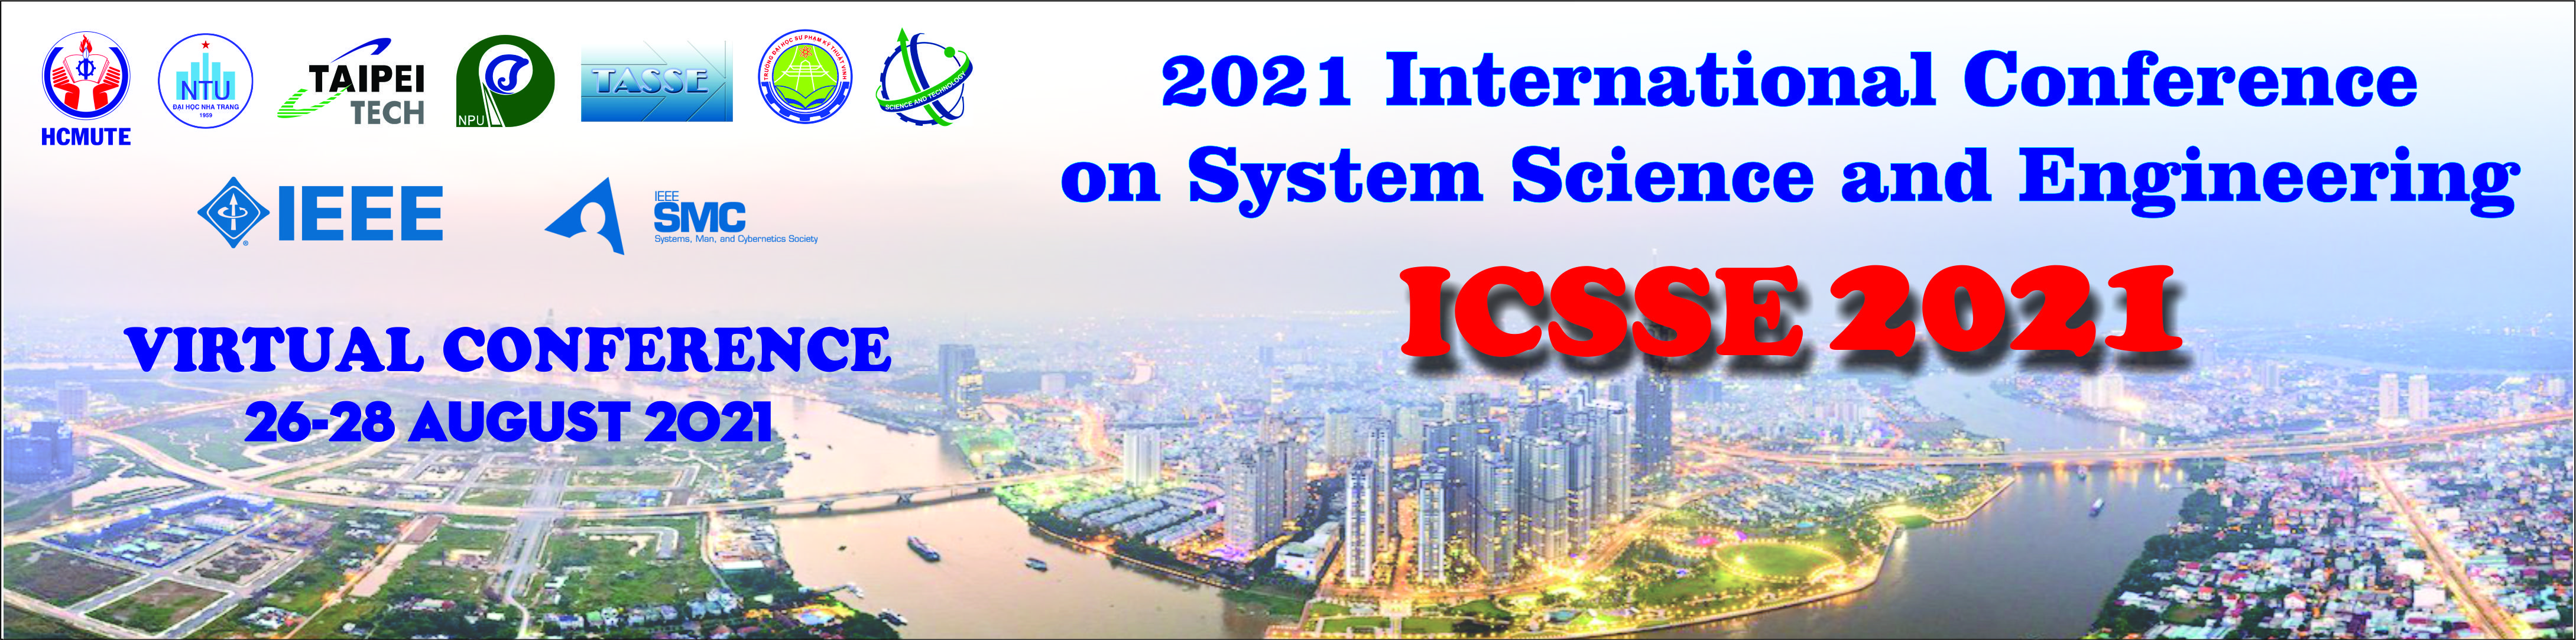 WELCOME TO ICSSE 2021